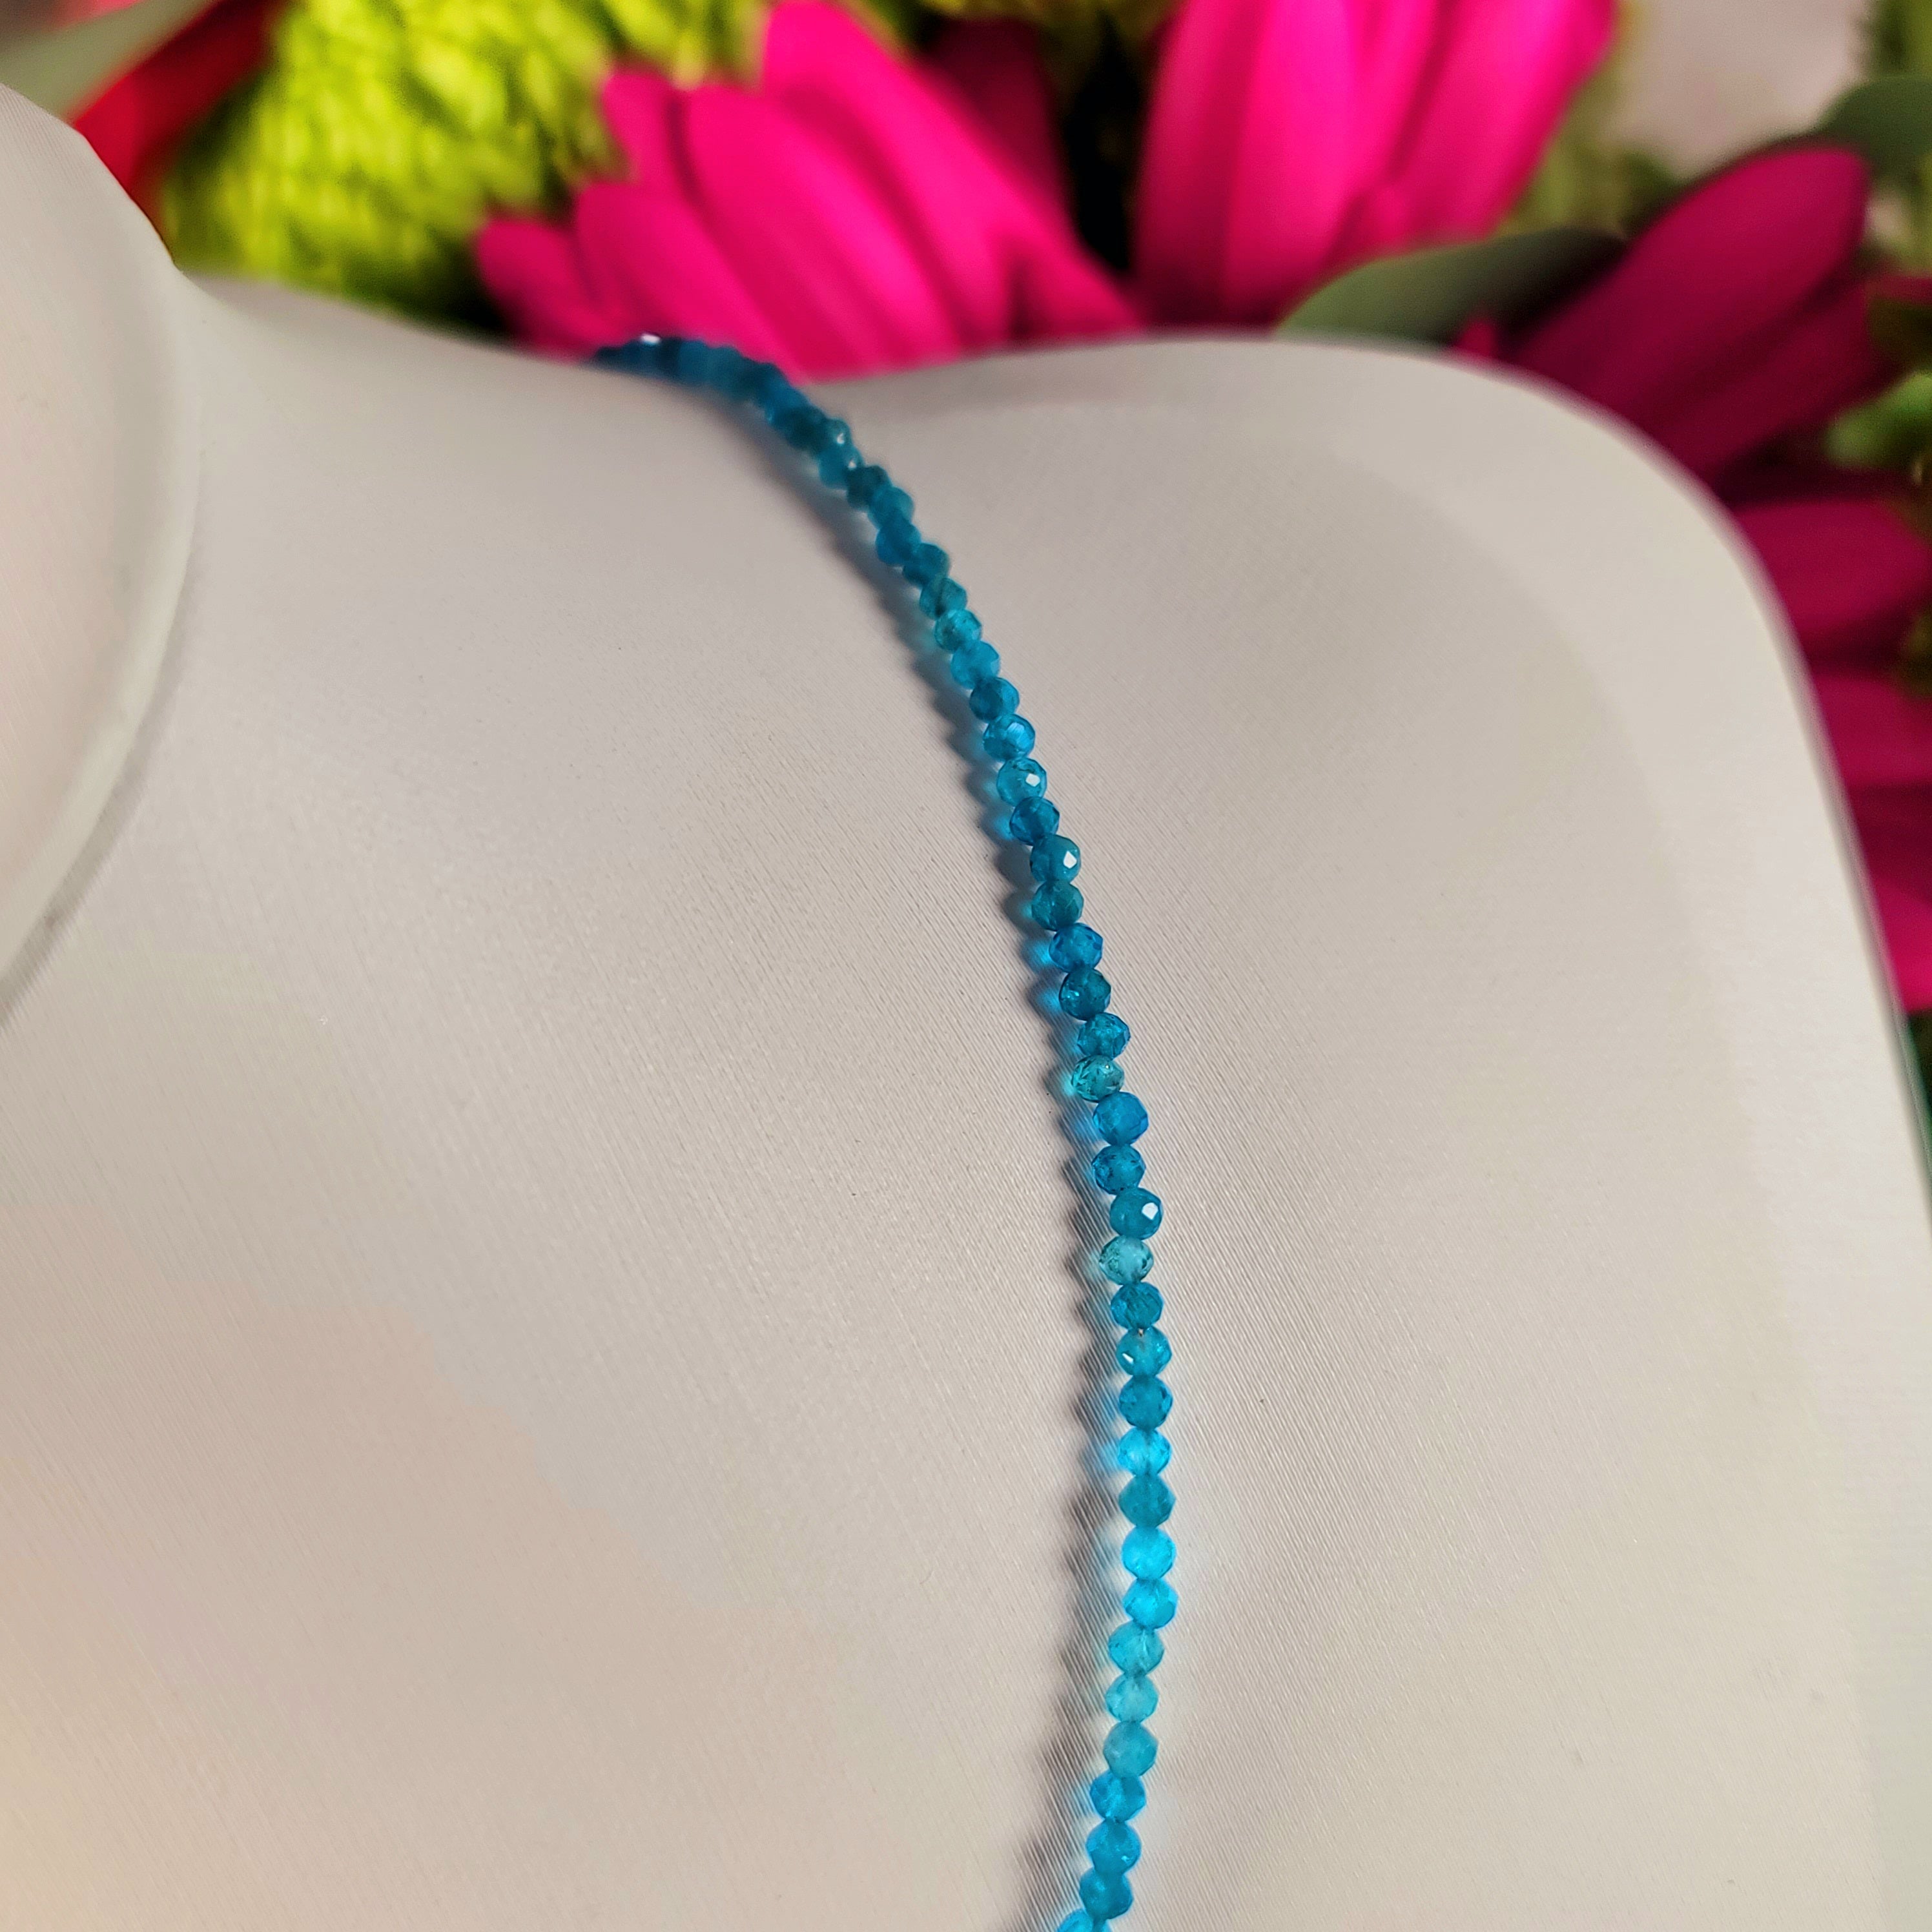 Blue Apatite Micro Faceted Choker/Layering Necklace for Promoting Clarity, Guidance & Unconditional Love